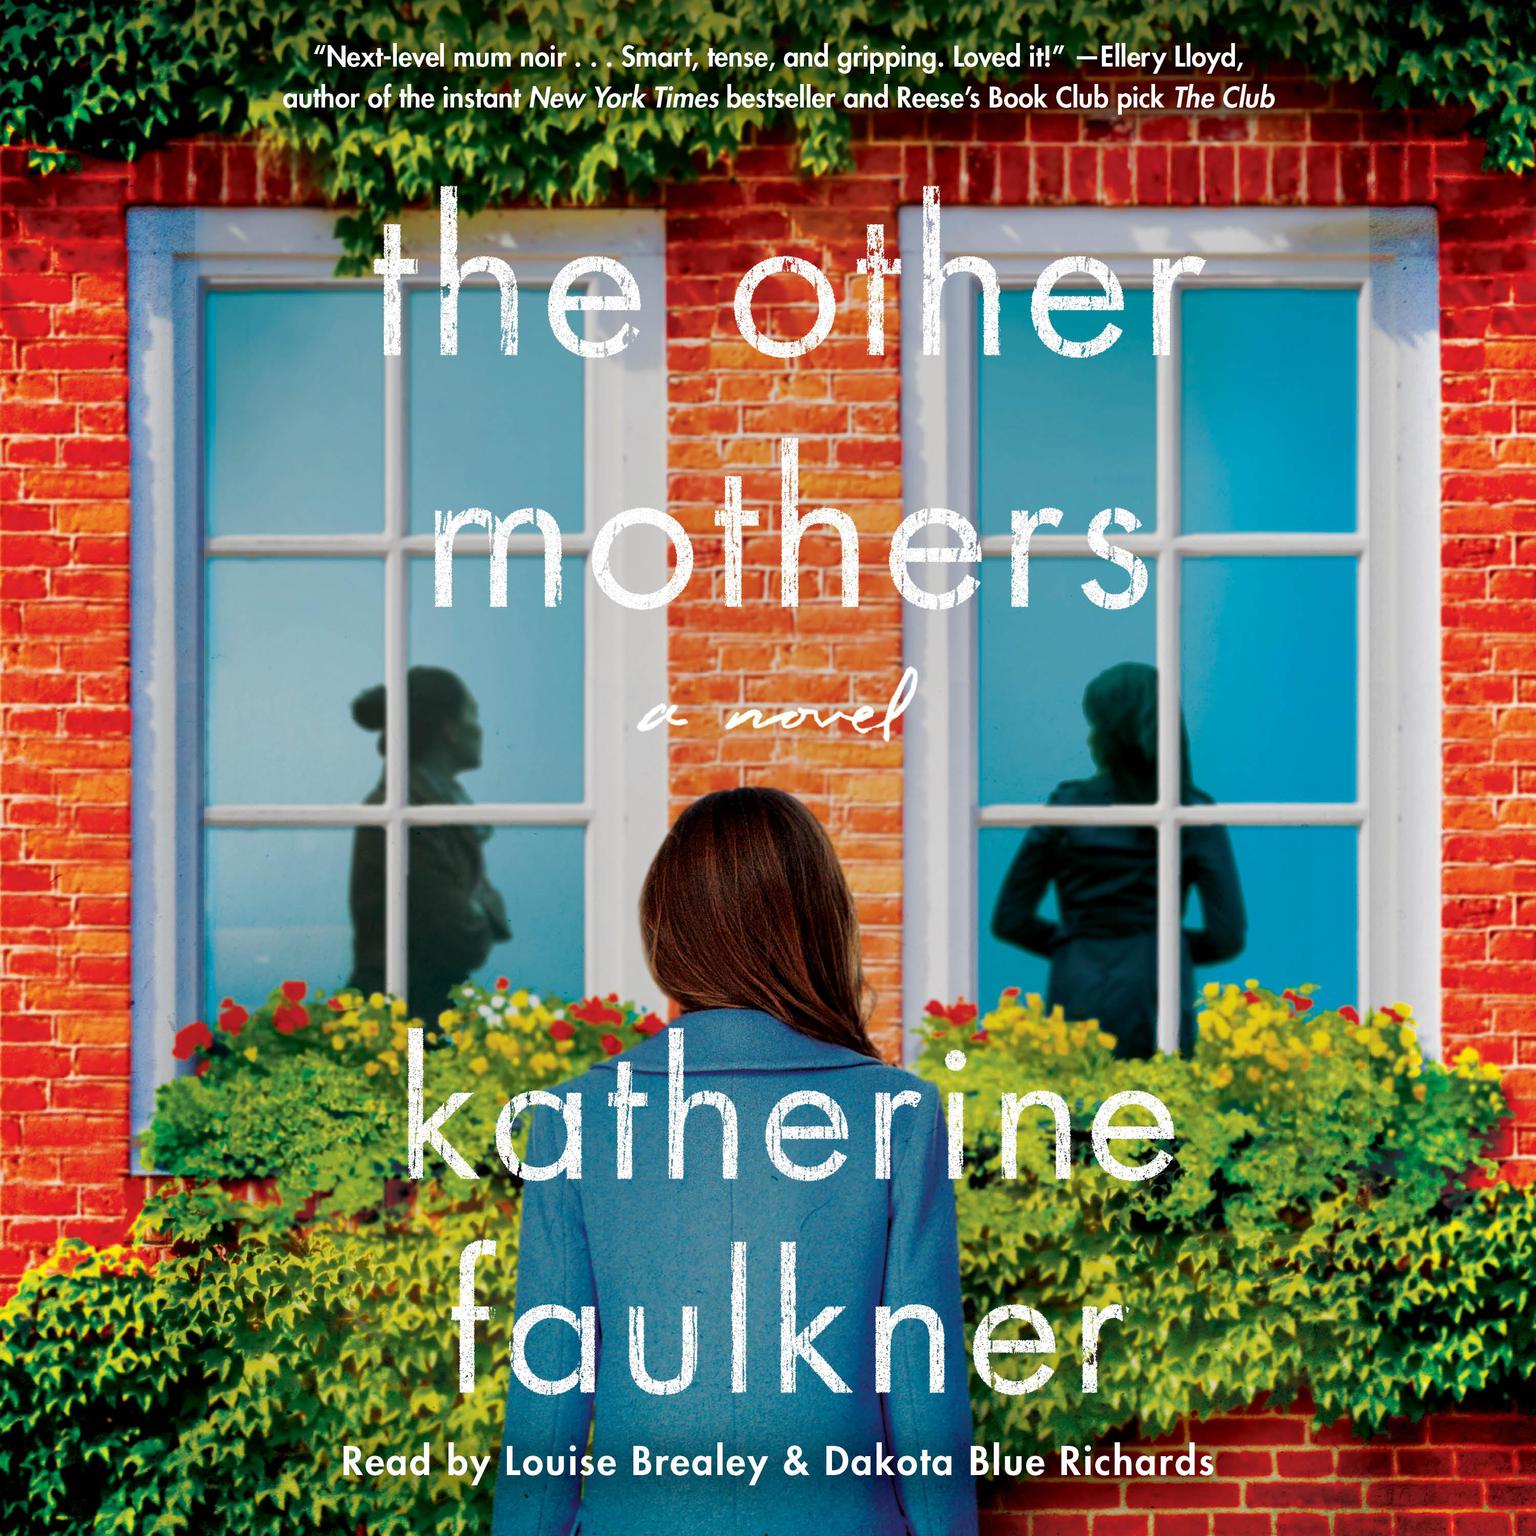 The Other Mothers Audiobook, by Katherine Faulkner